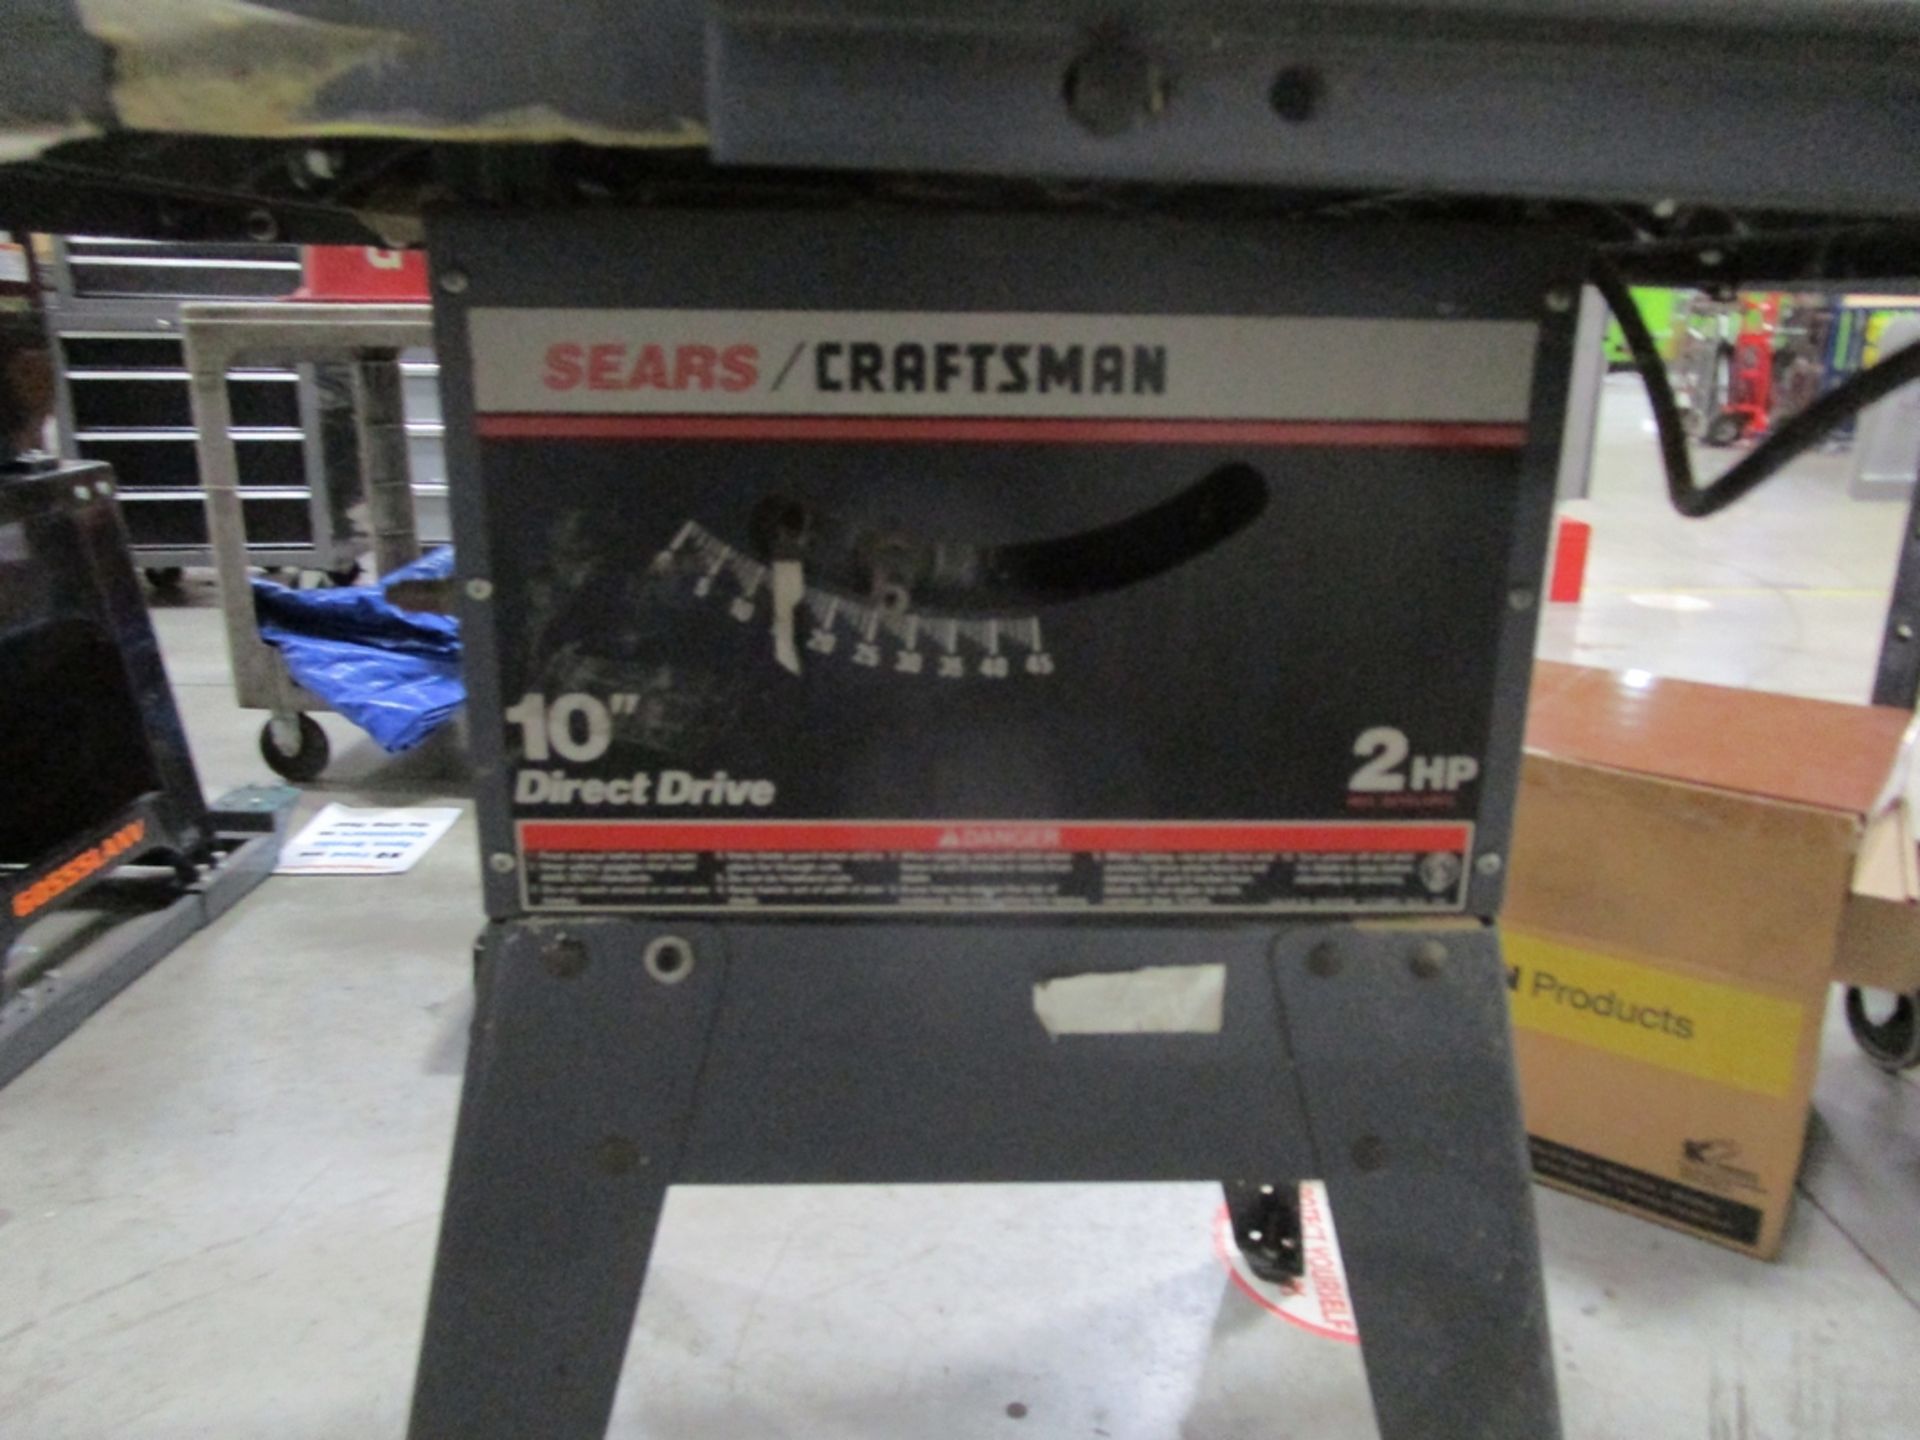 Craftsman 10" Direct Drive Table Saw - Image 2 of 3